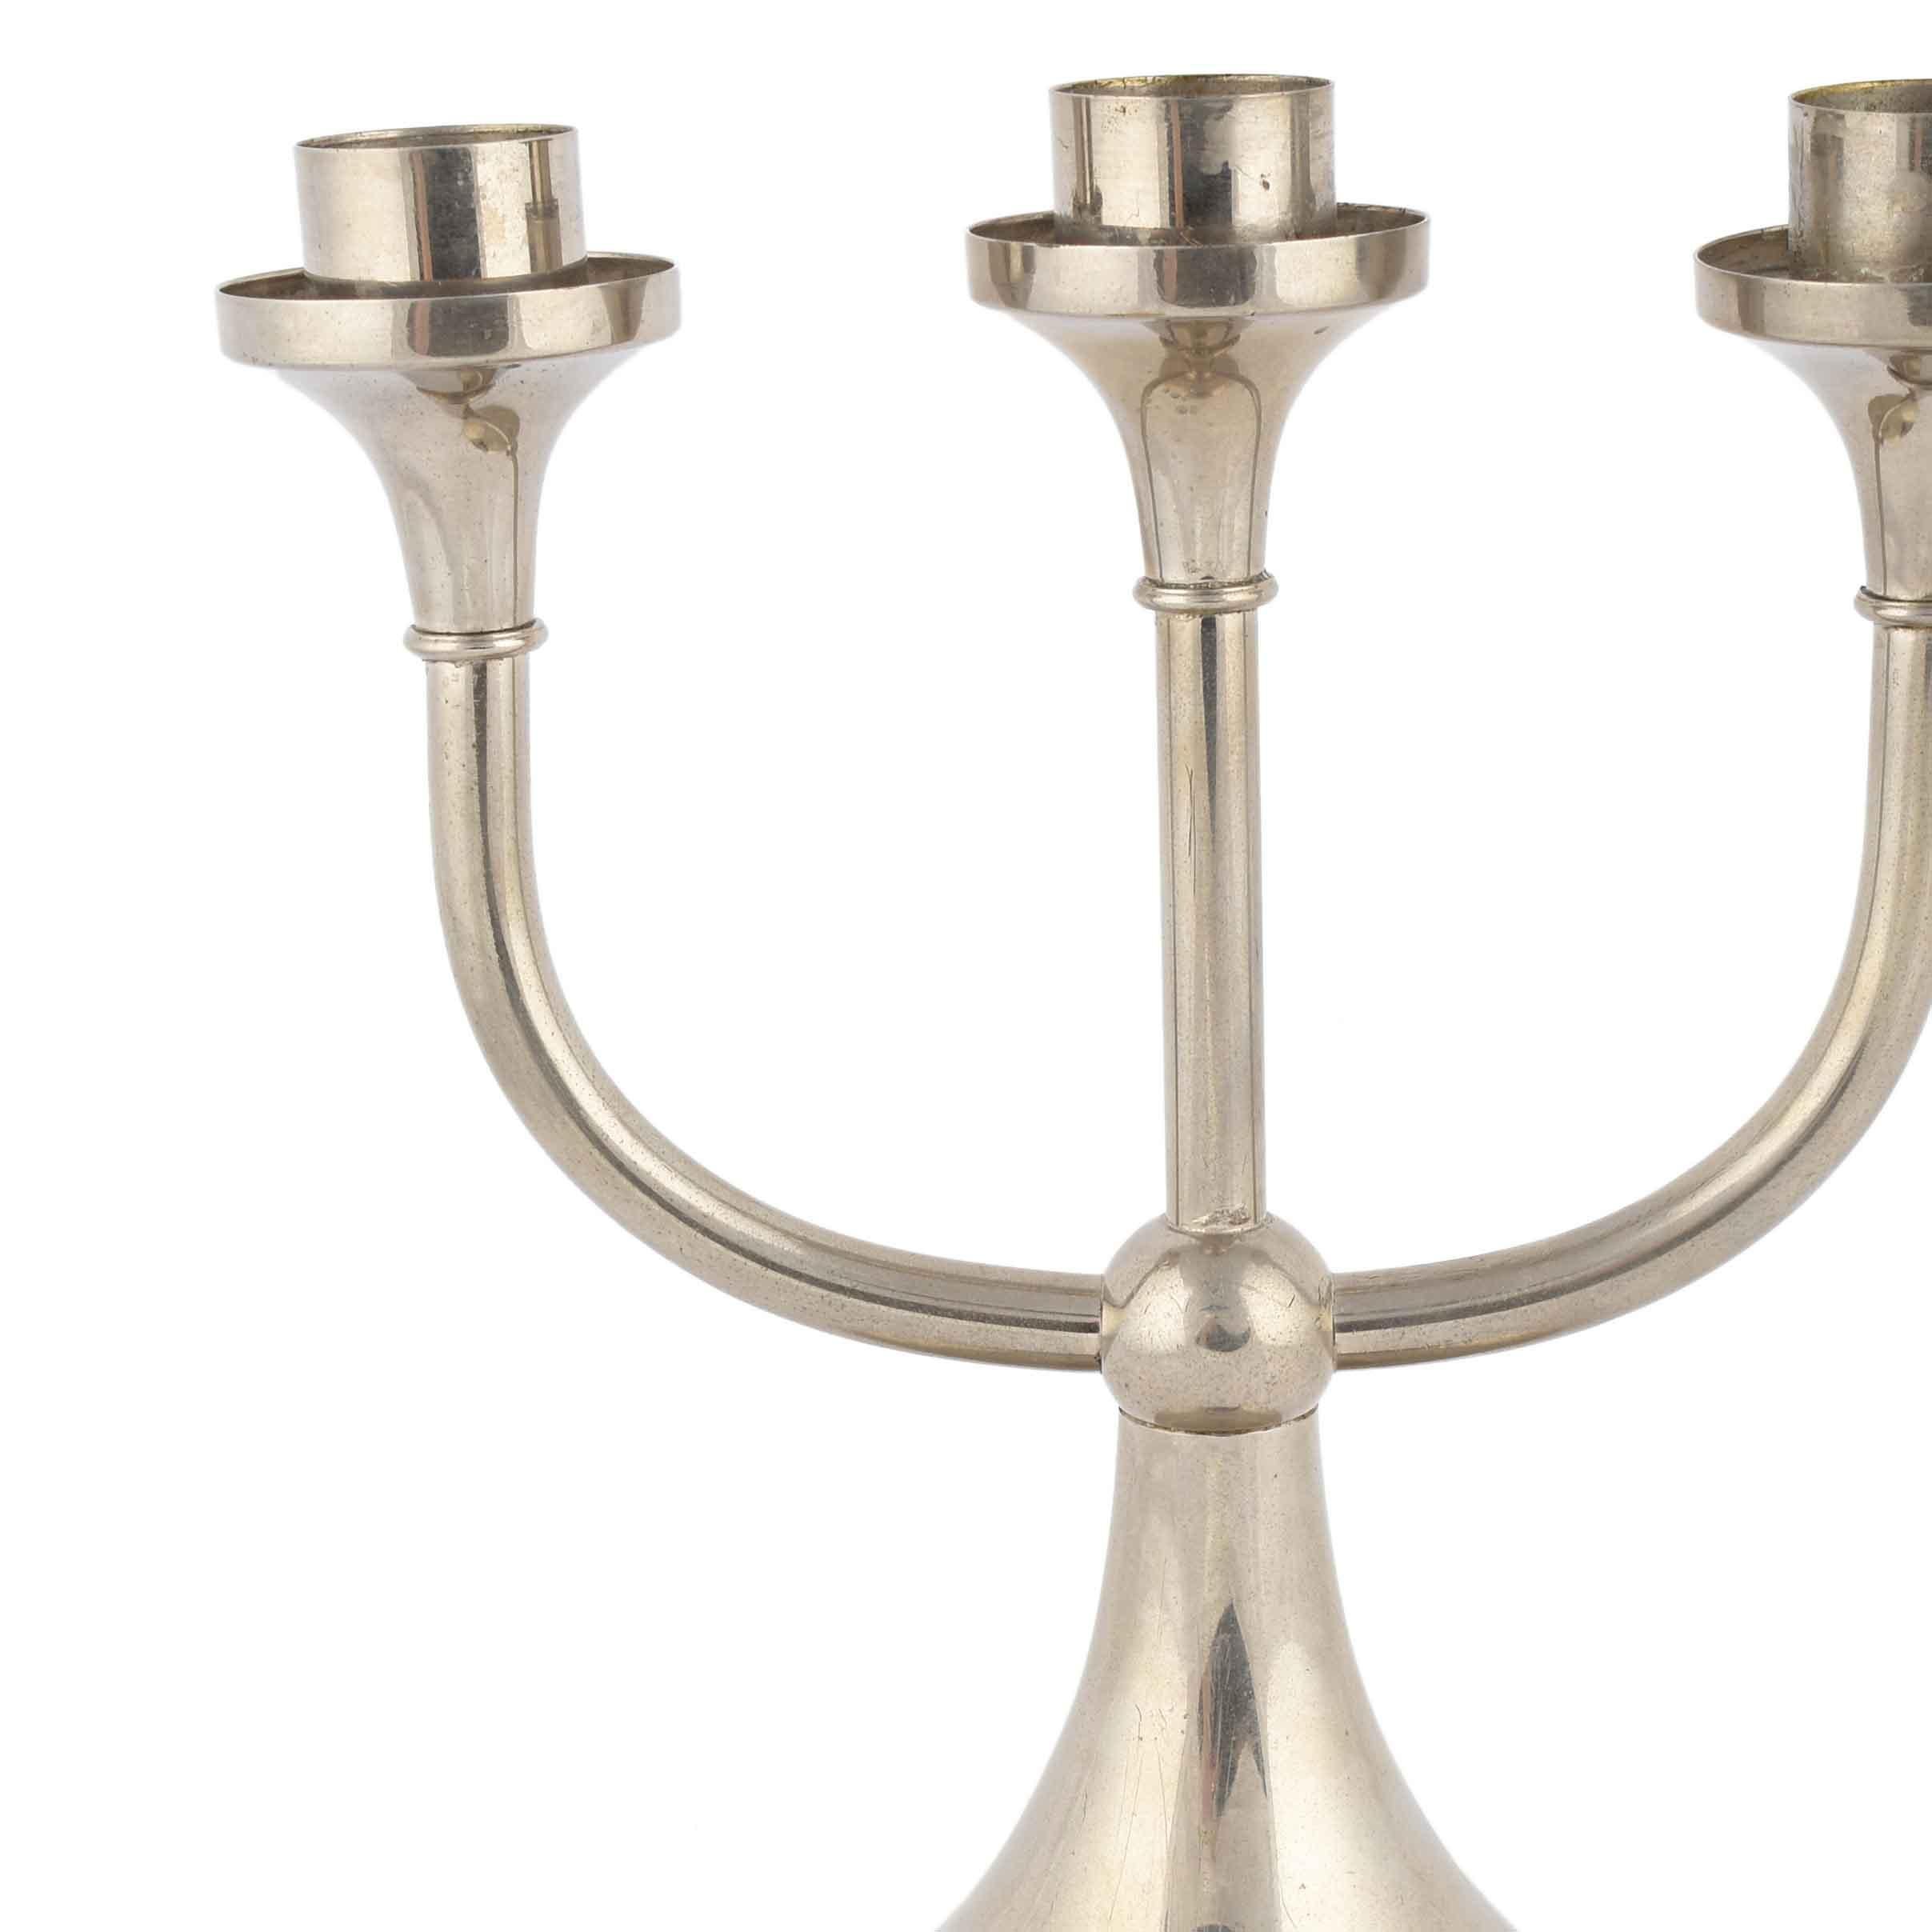 Vintage nickel-plated metal candleholder is an original decorative object realized between the 1920s and the 1930s.

Original nickel and metal. Realized by Kallmeyer & Harjes, Gotha. Made in Germany.

The mark of the factory is impressed on the